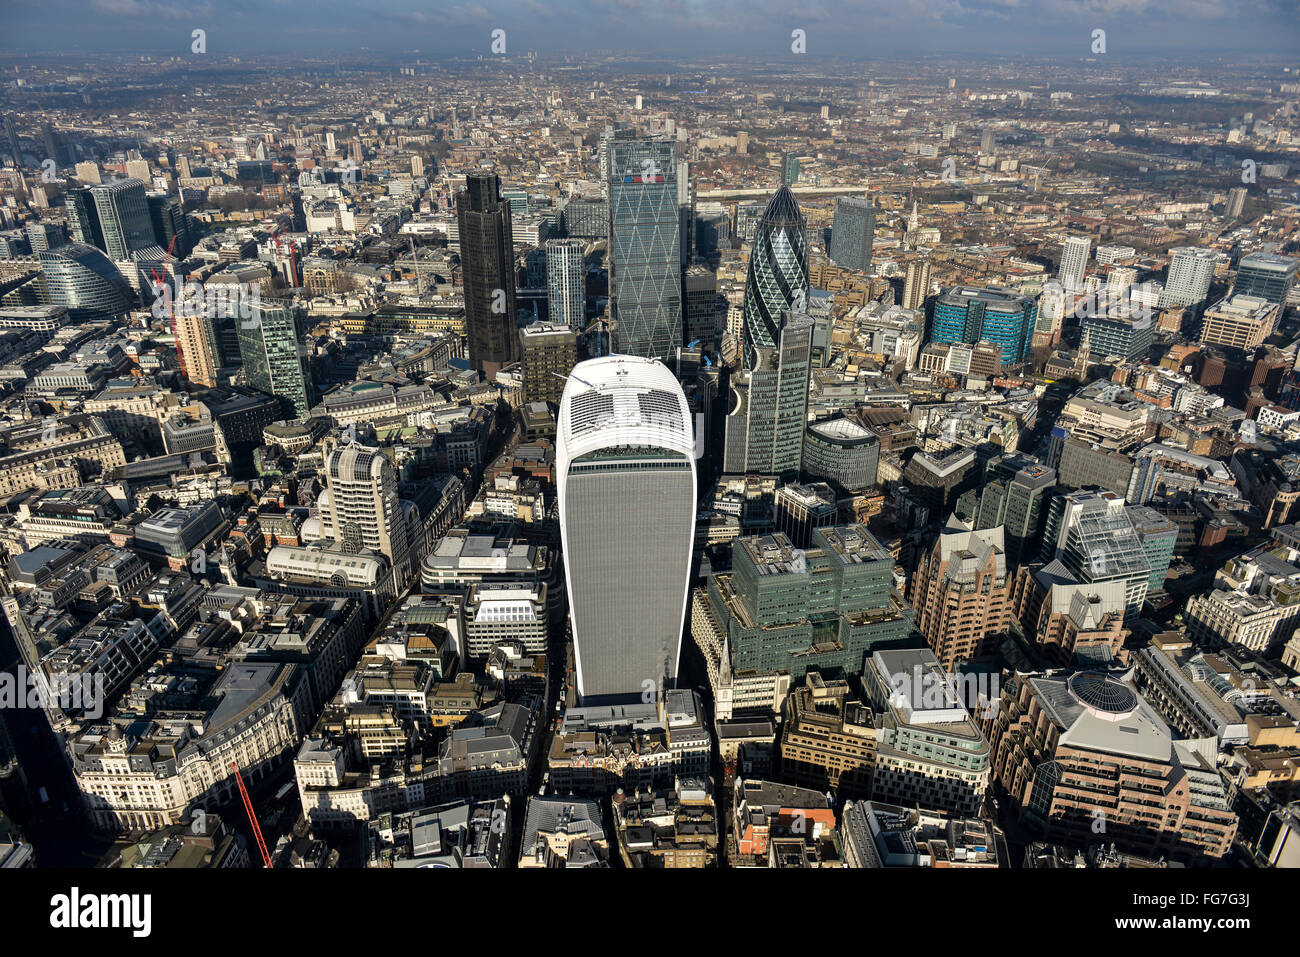 An aerial view of the Skyscrapers in the City of London financial district Stock Photo